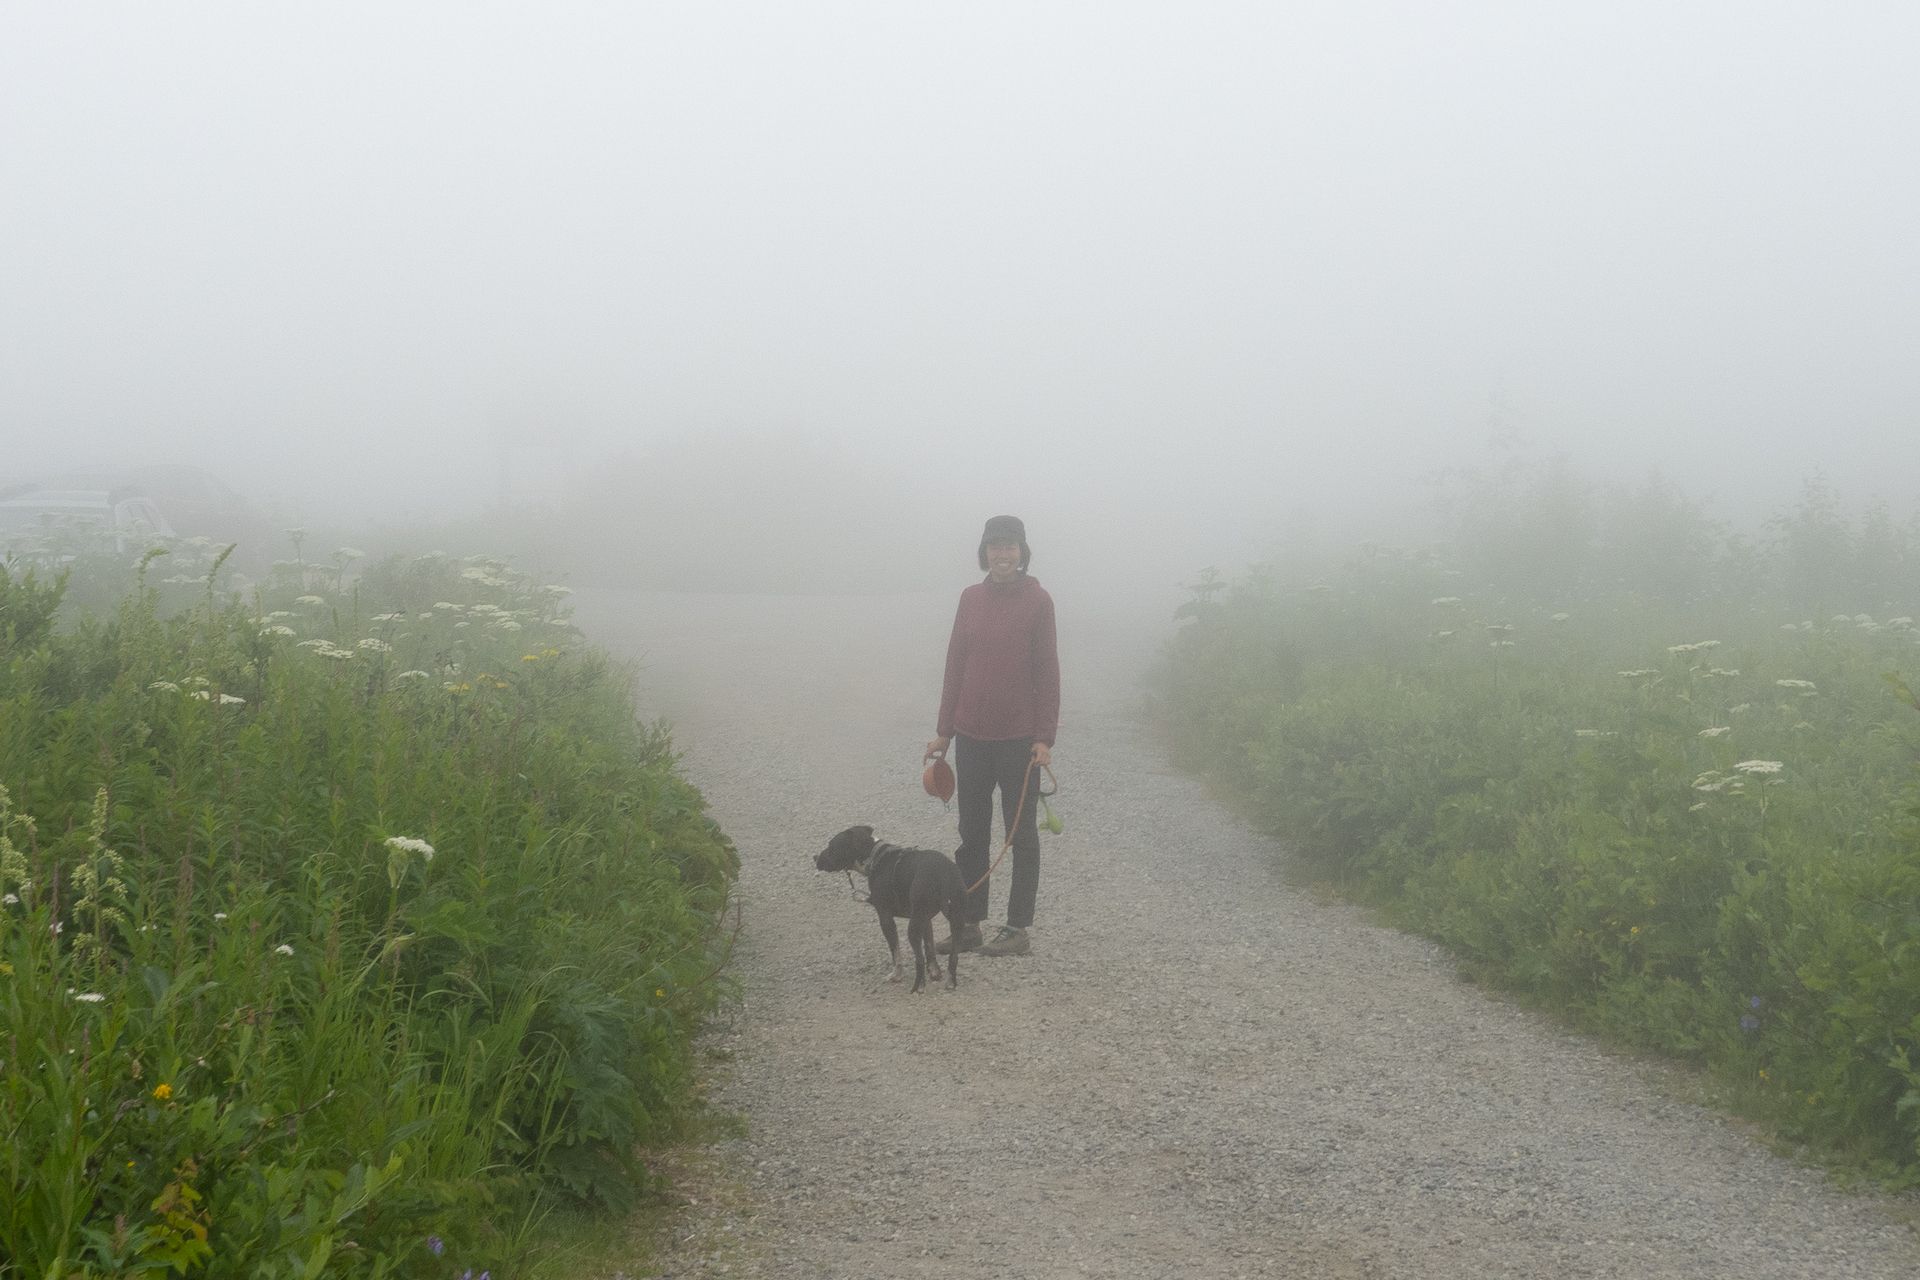 At one point, the fog was so thick we could barely see where we were going.